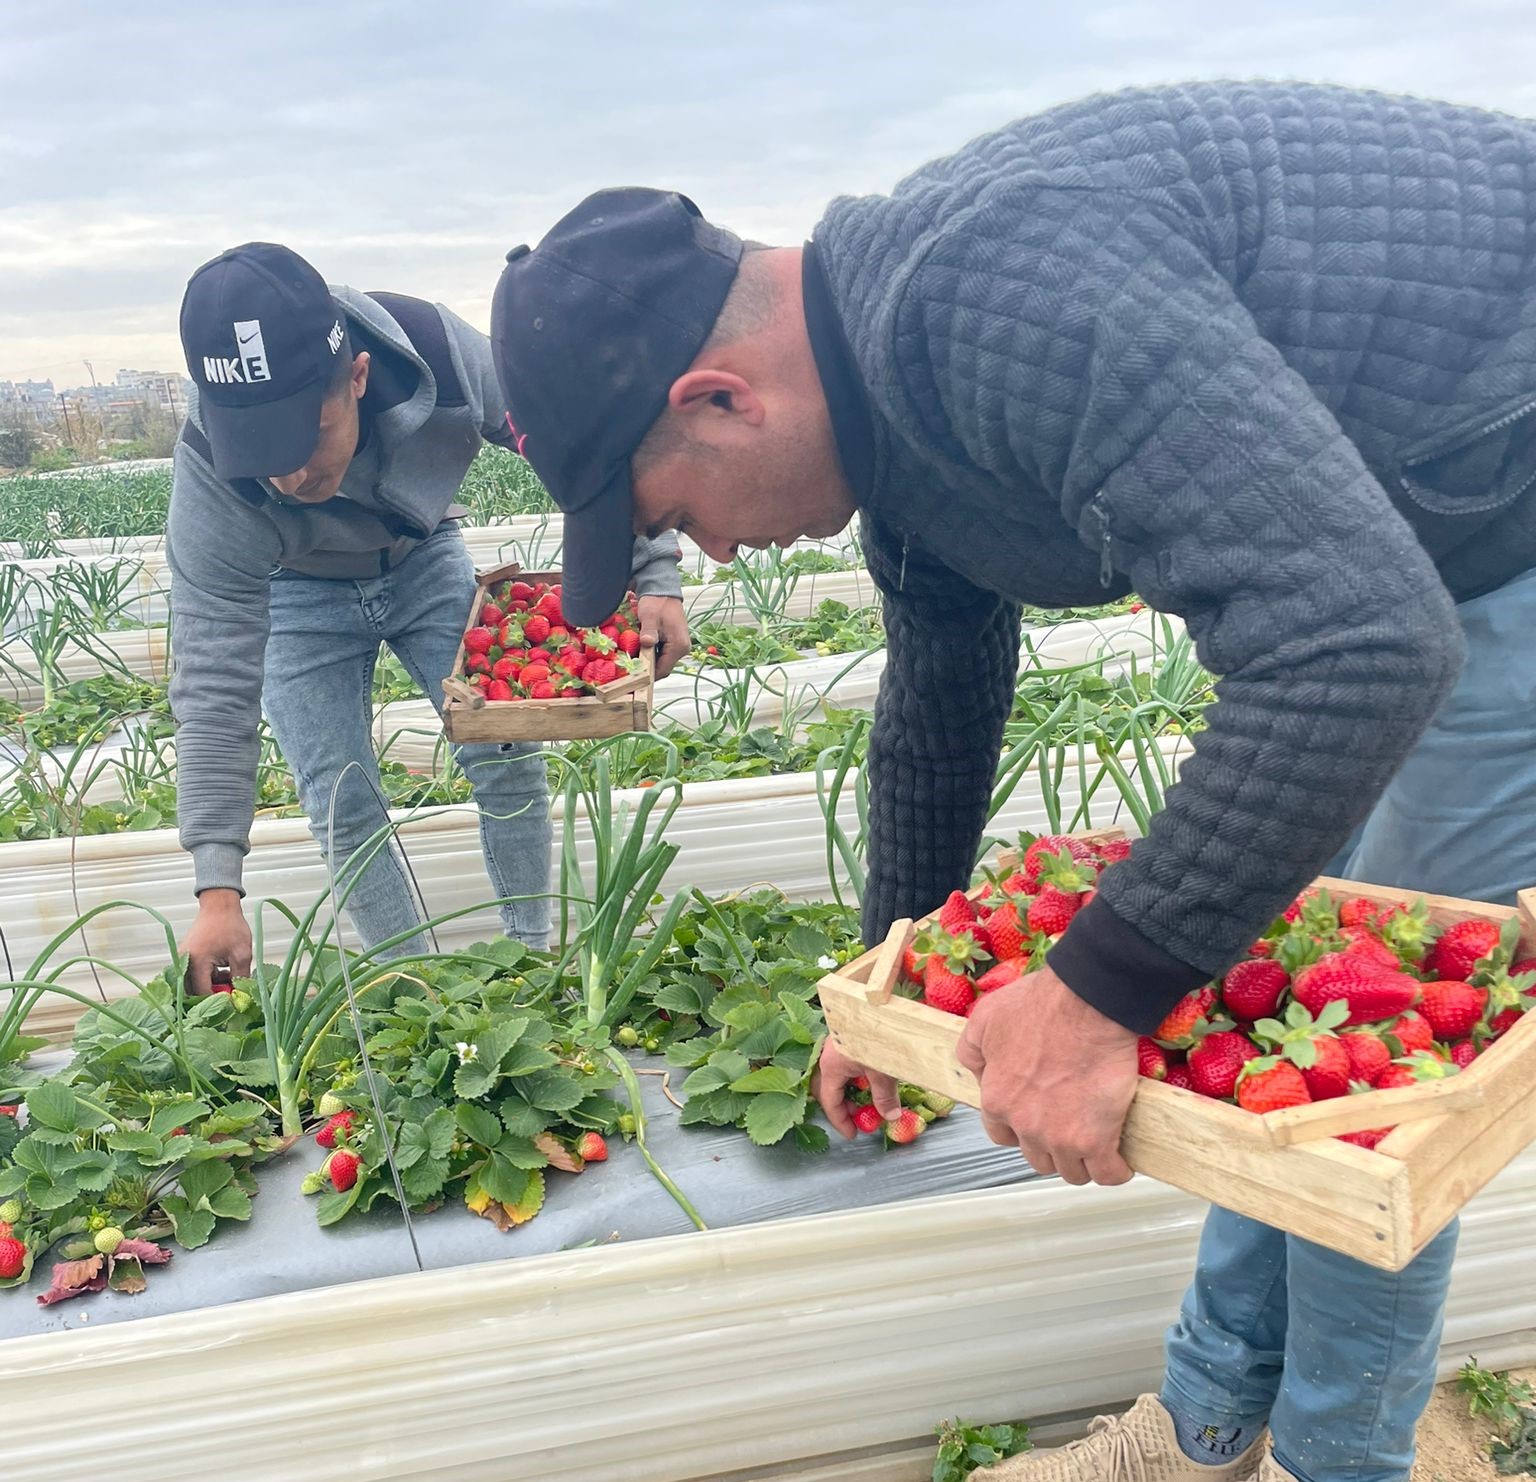 Palestinian farmers harvesting strawberries in Beit Lahia, the Gaza Strip, ahead of their export, 23 February 2023. Photo by OCH